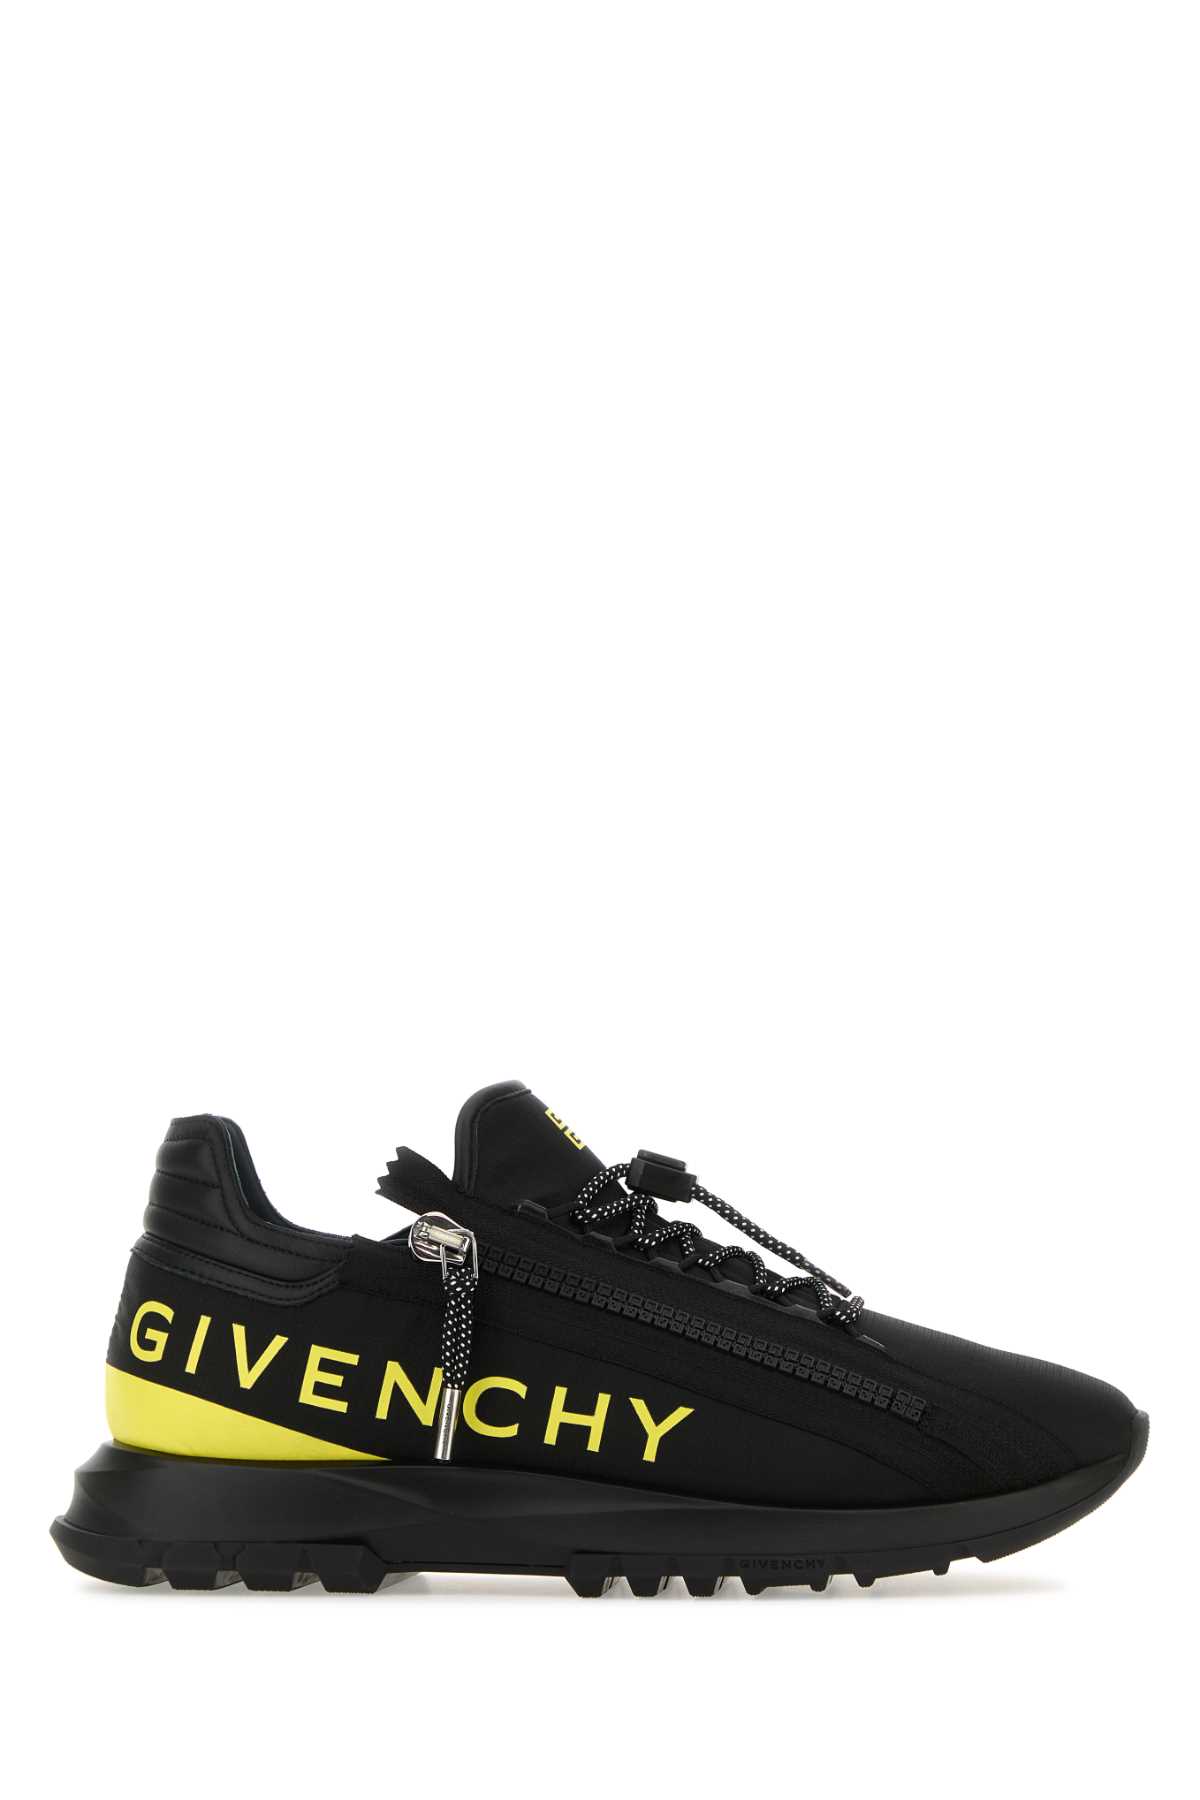 Shop Givenchy Black Fabric Spectre Sneakers In Blackyellow